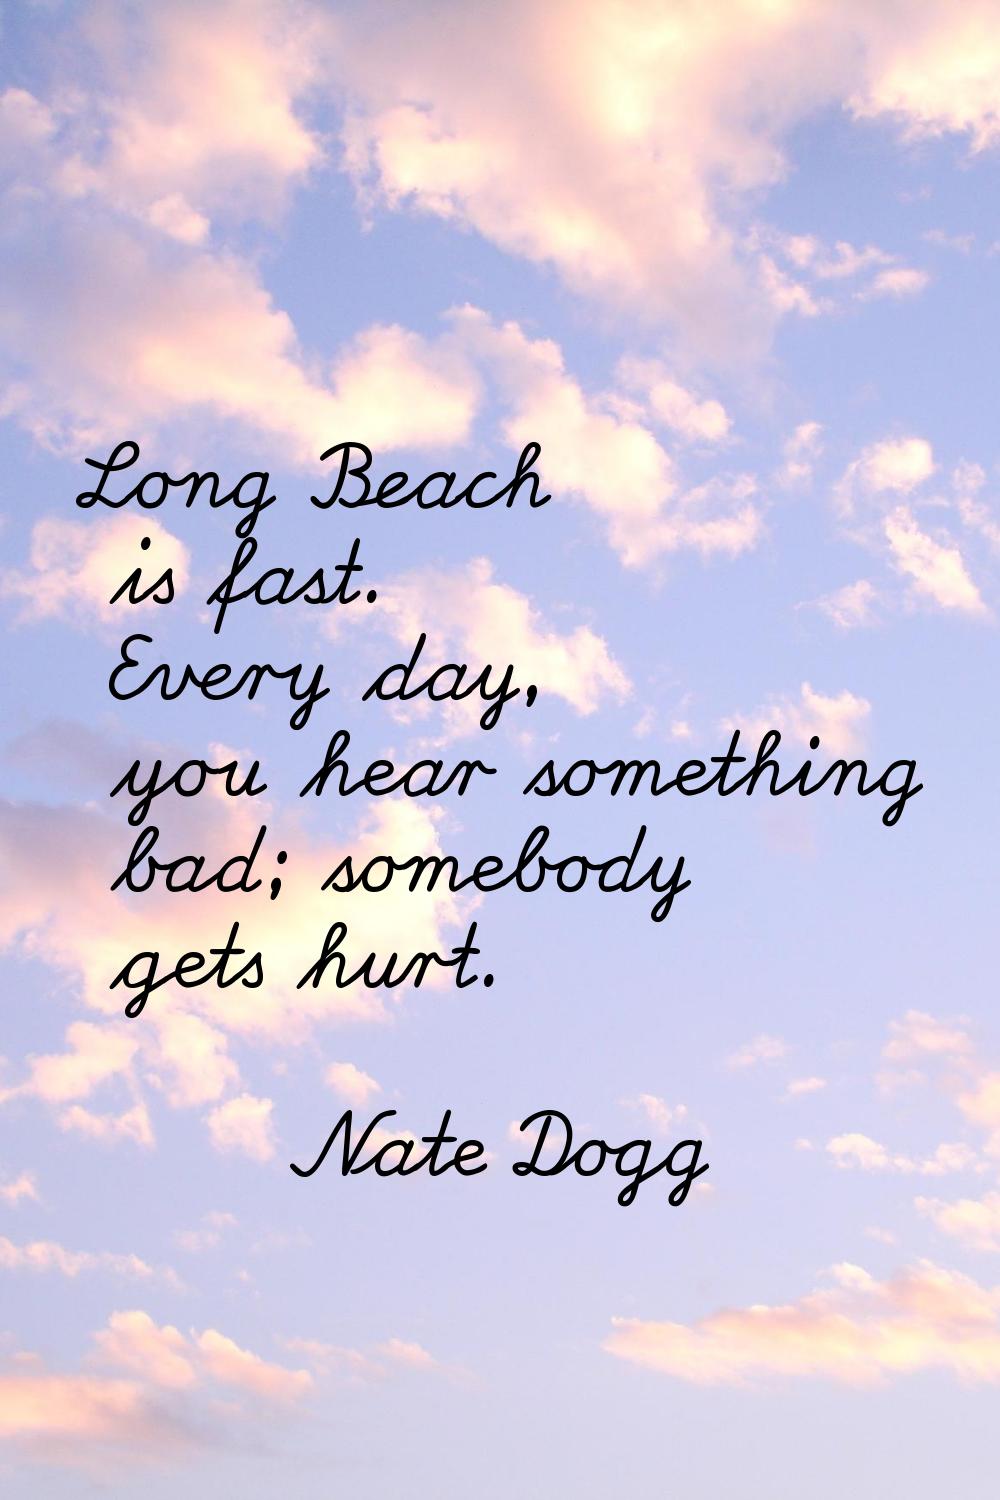 Long Beach is fast. Every day, you hear something bad; somebody gets hurt.